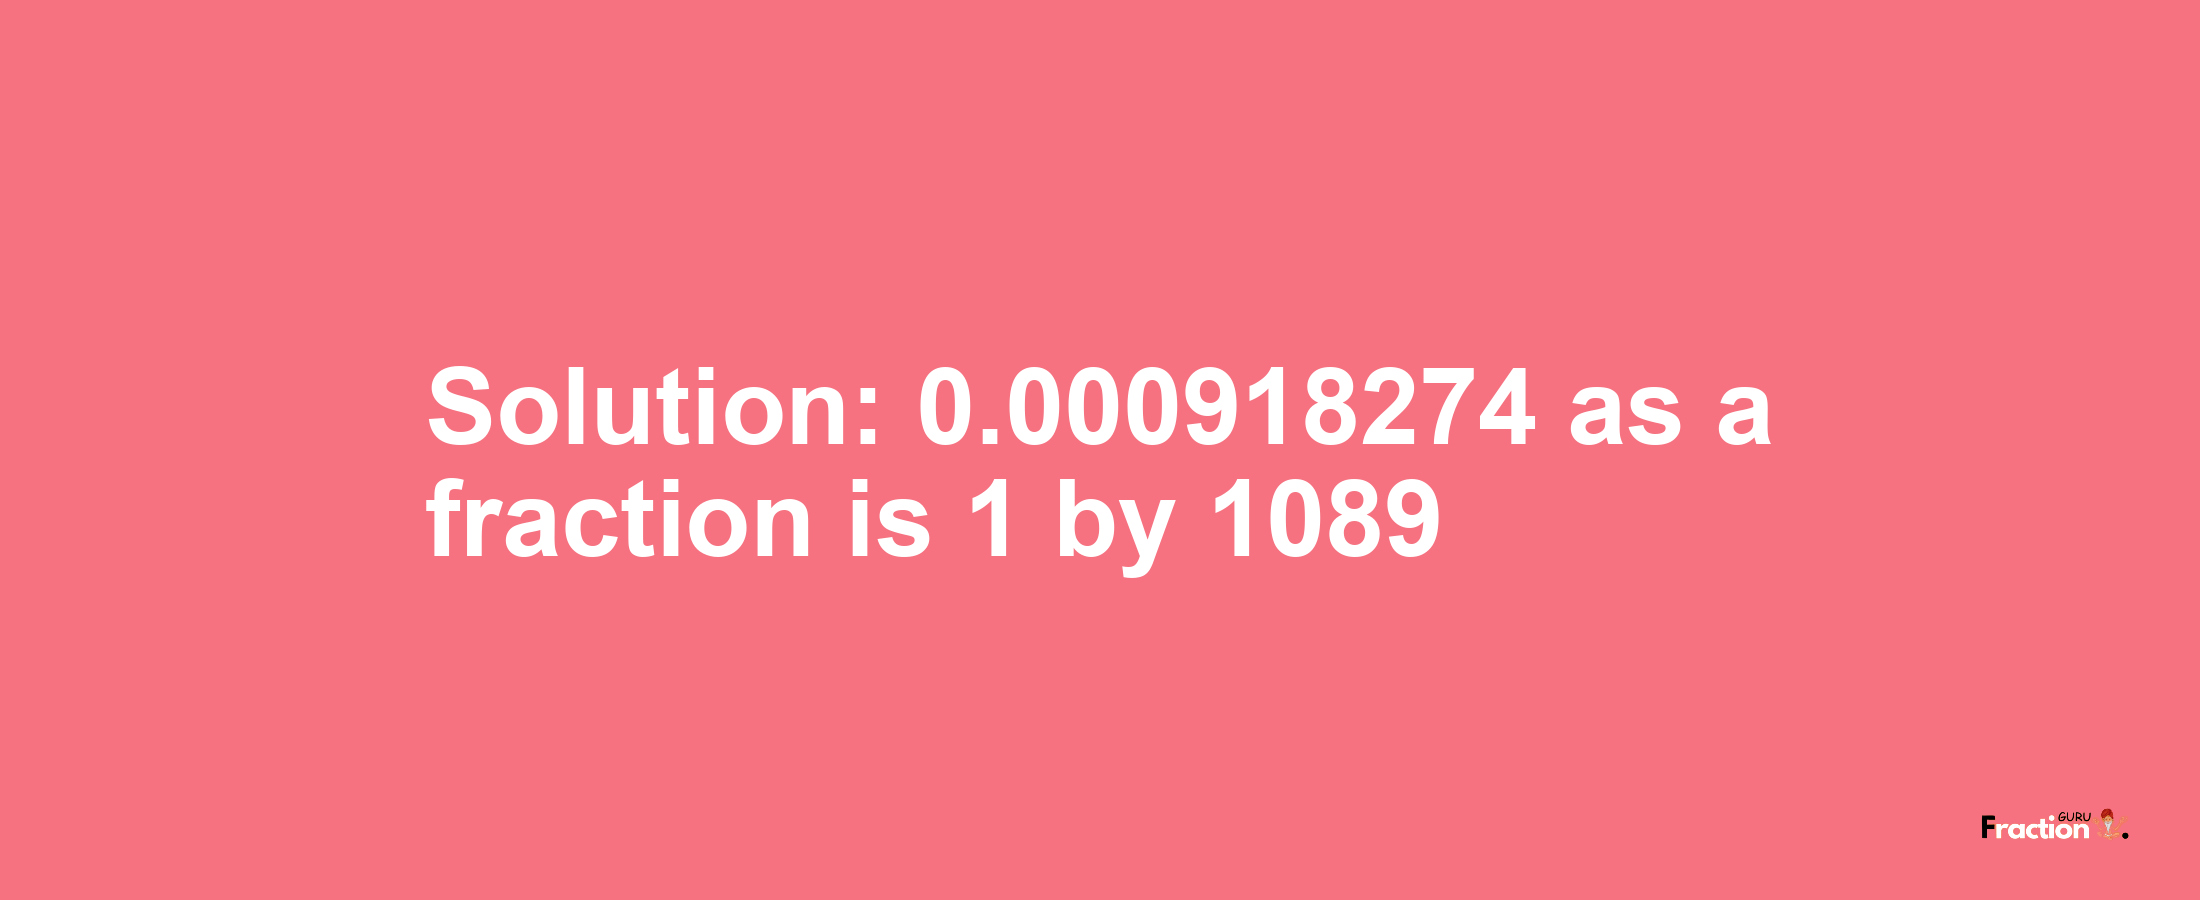 Solution:0.000918274 as a fraction is 1/1089